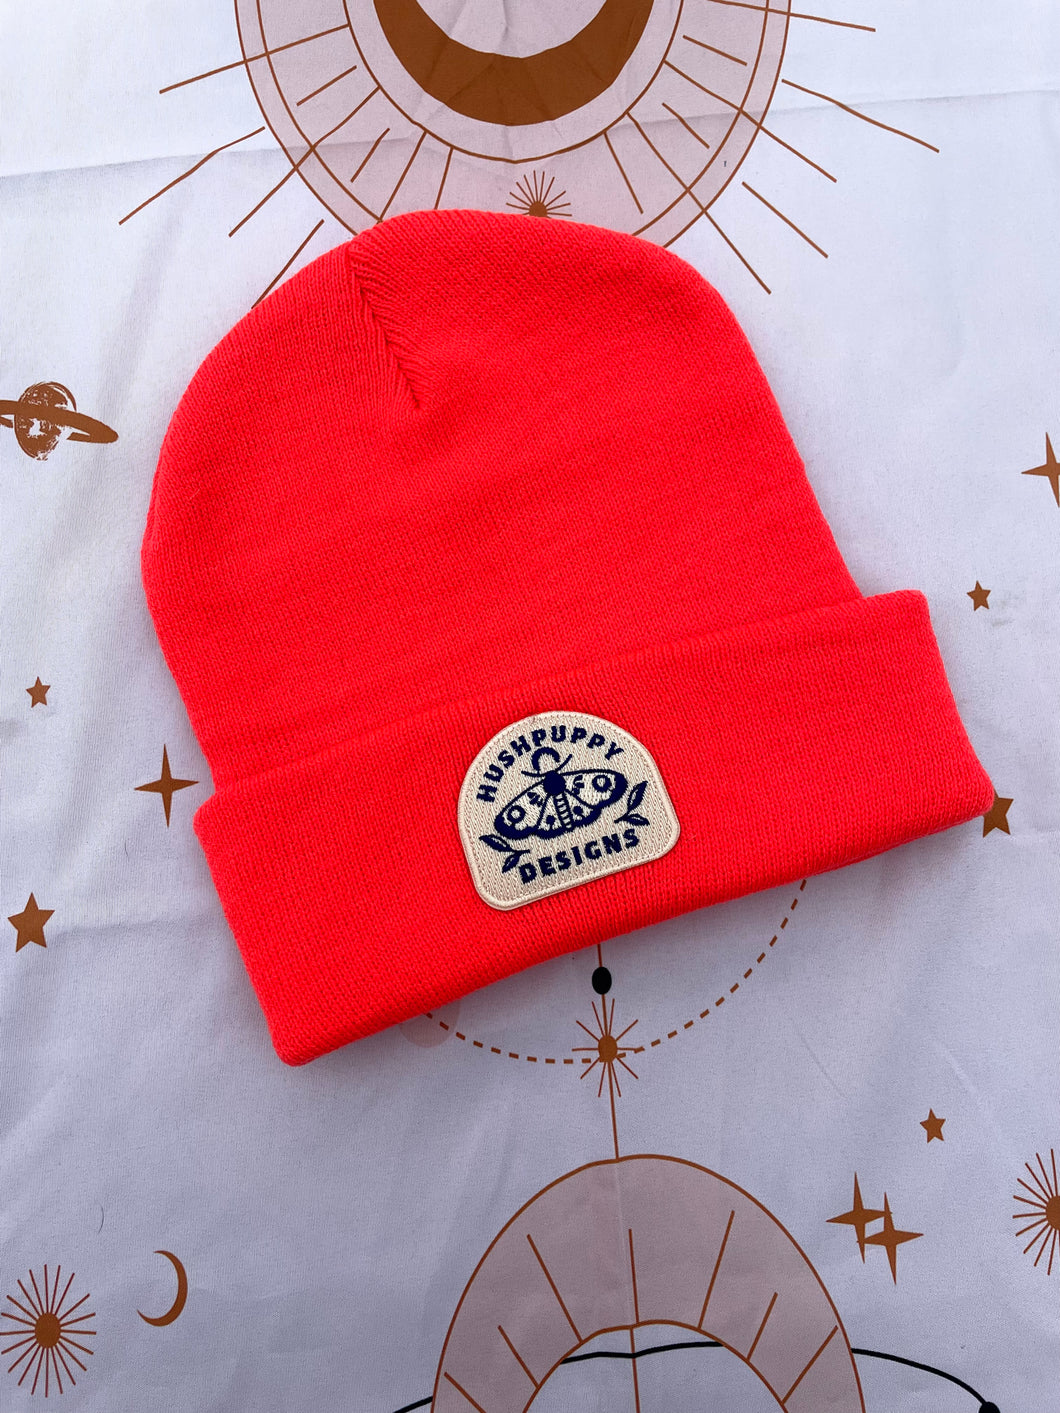 Hushpuppy Patched Toques